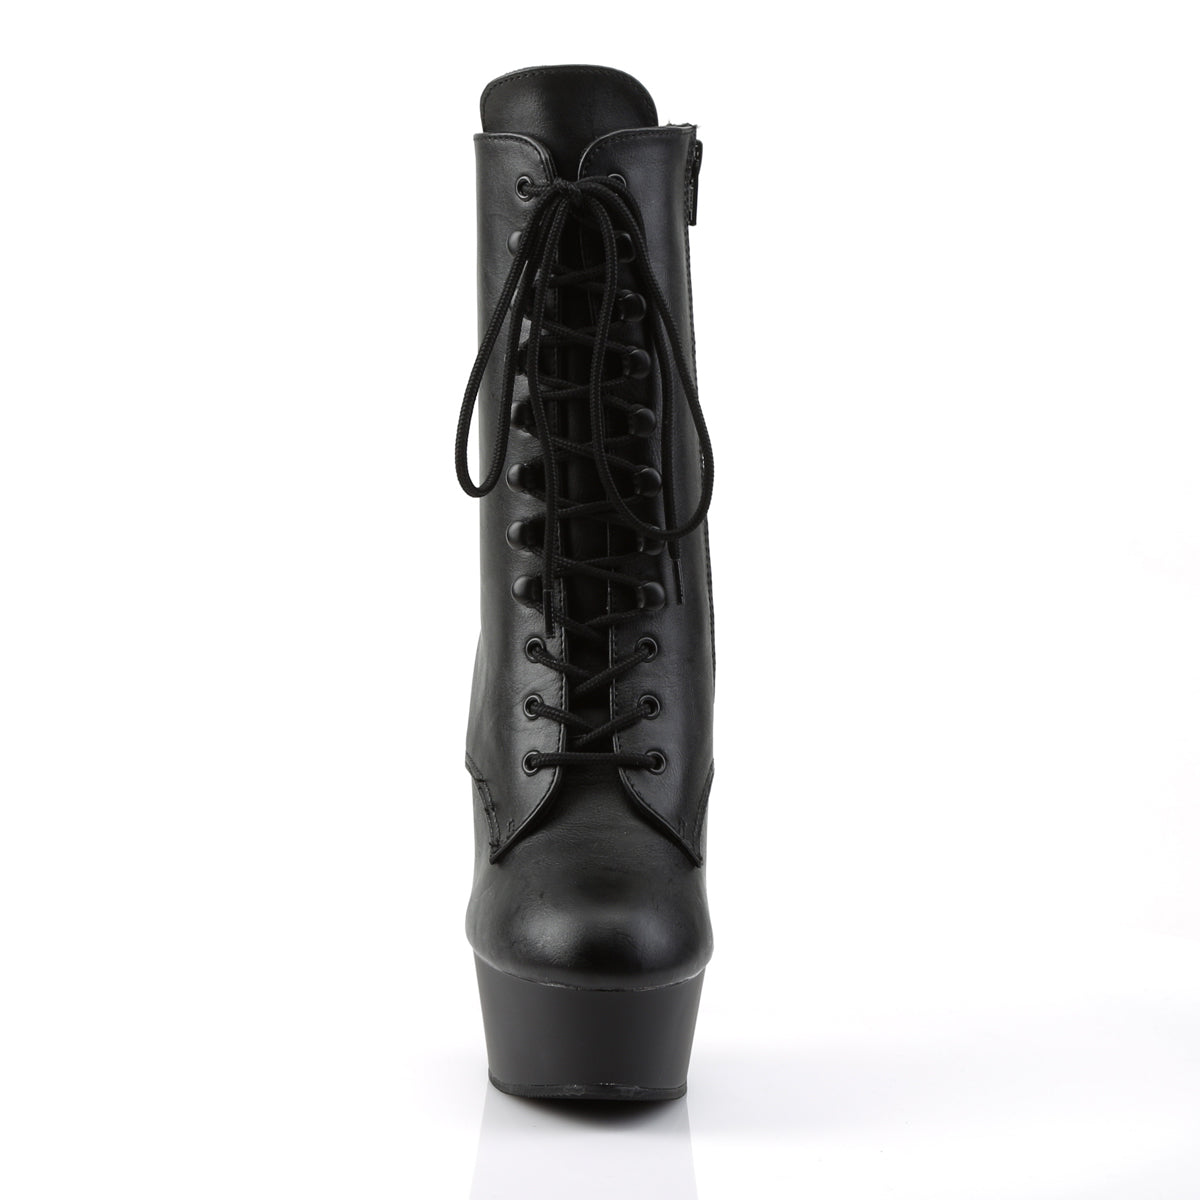 DELIGHT-1020 Black Faux Leather Ankle Boot Pleaser